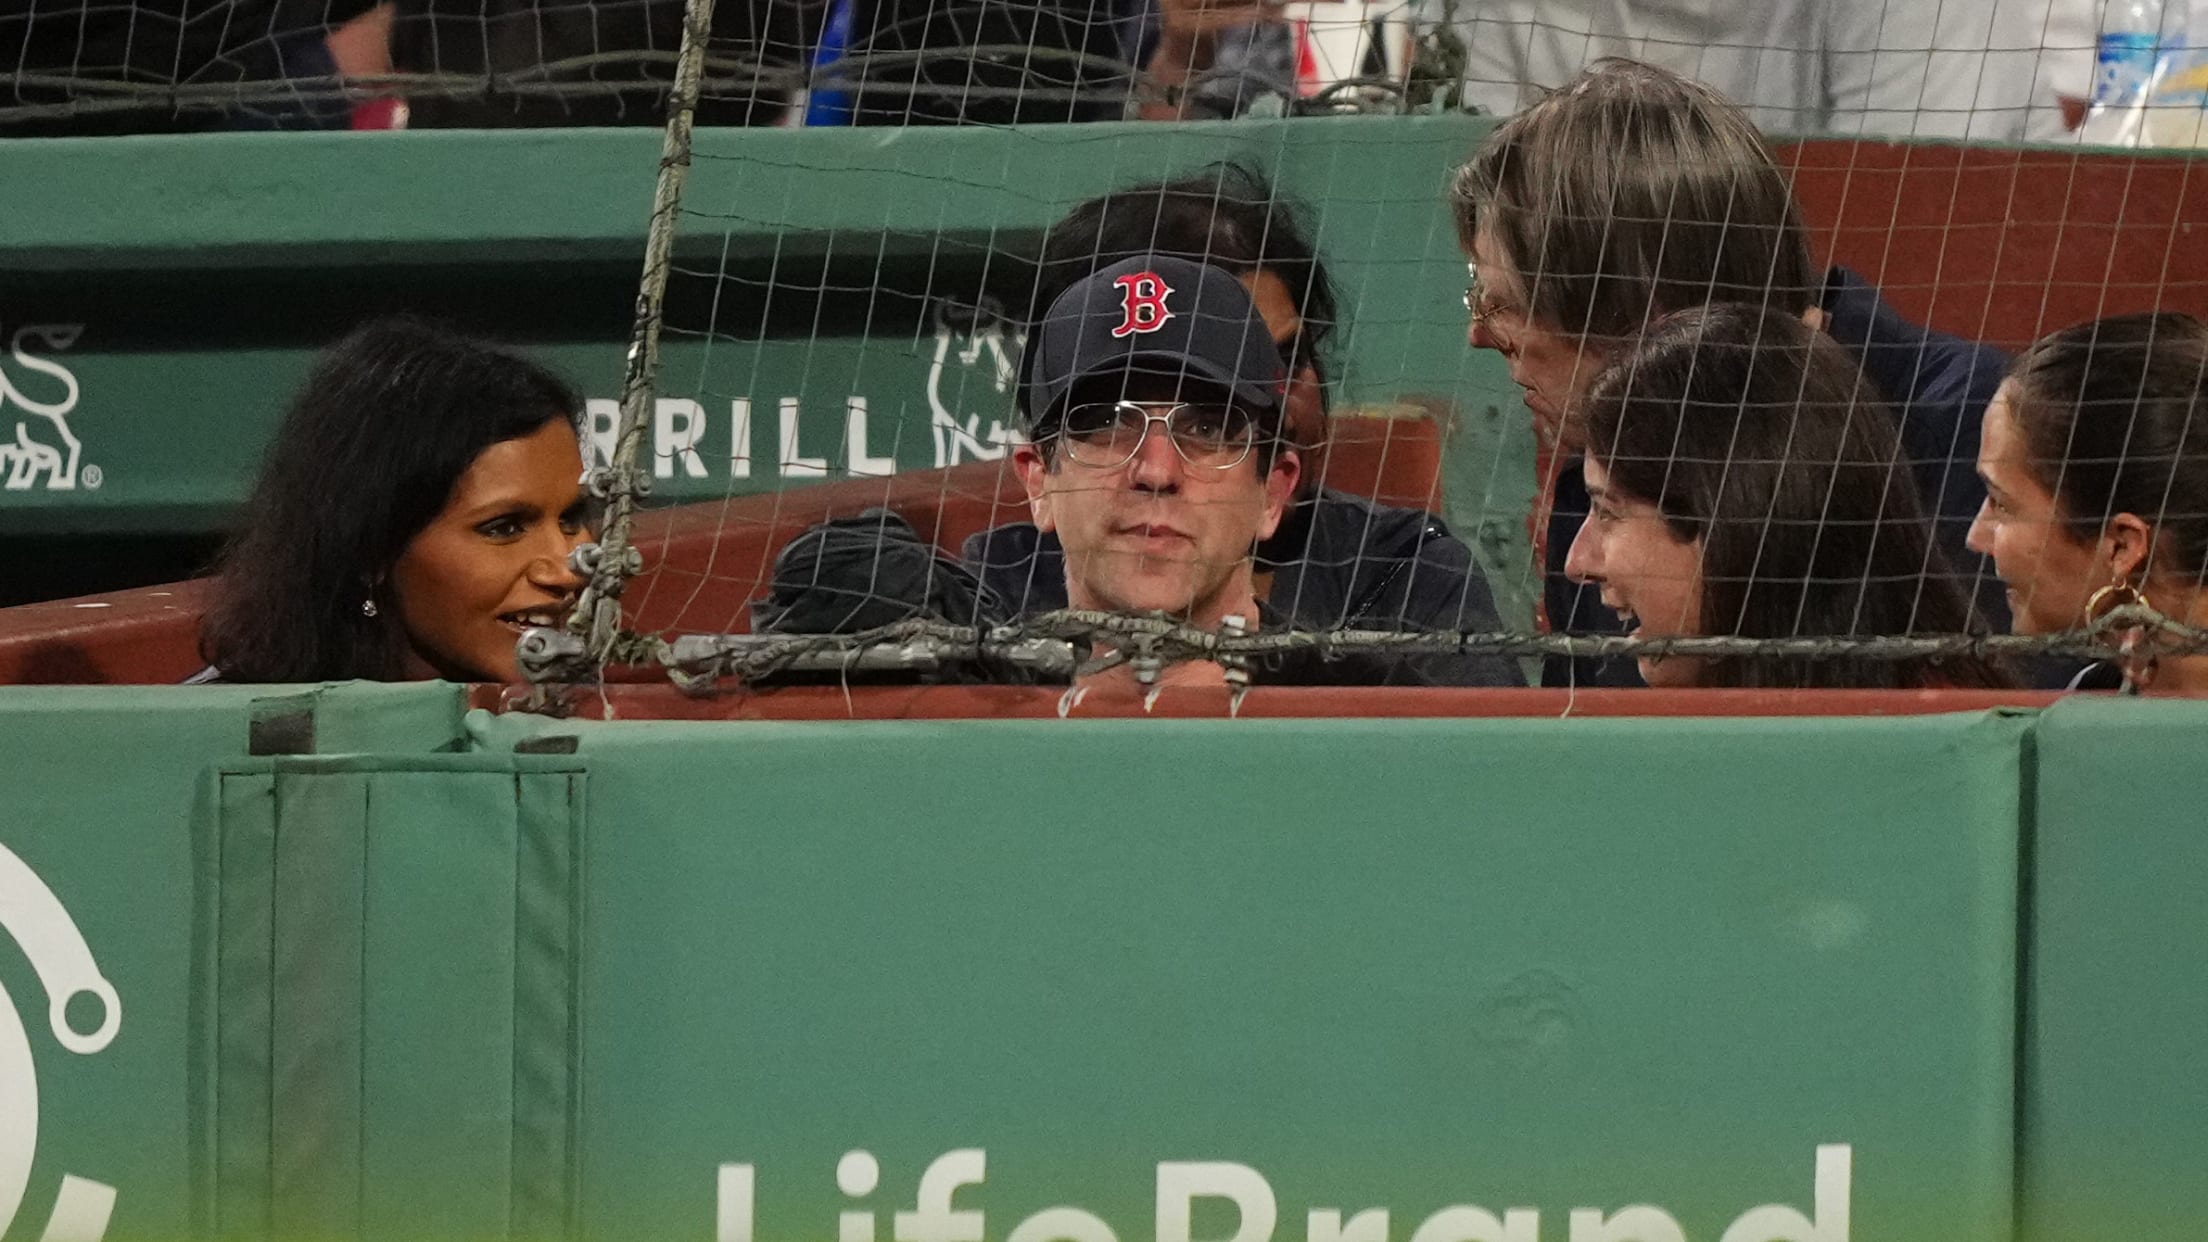 Mindy Kaling and B.J. Novak in front-row seats at Fenway Park